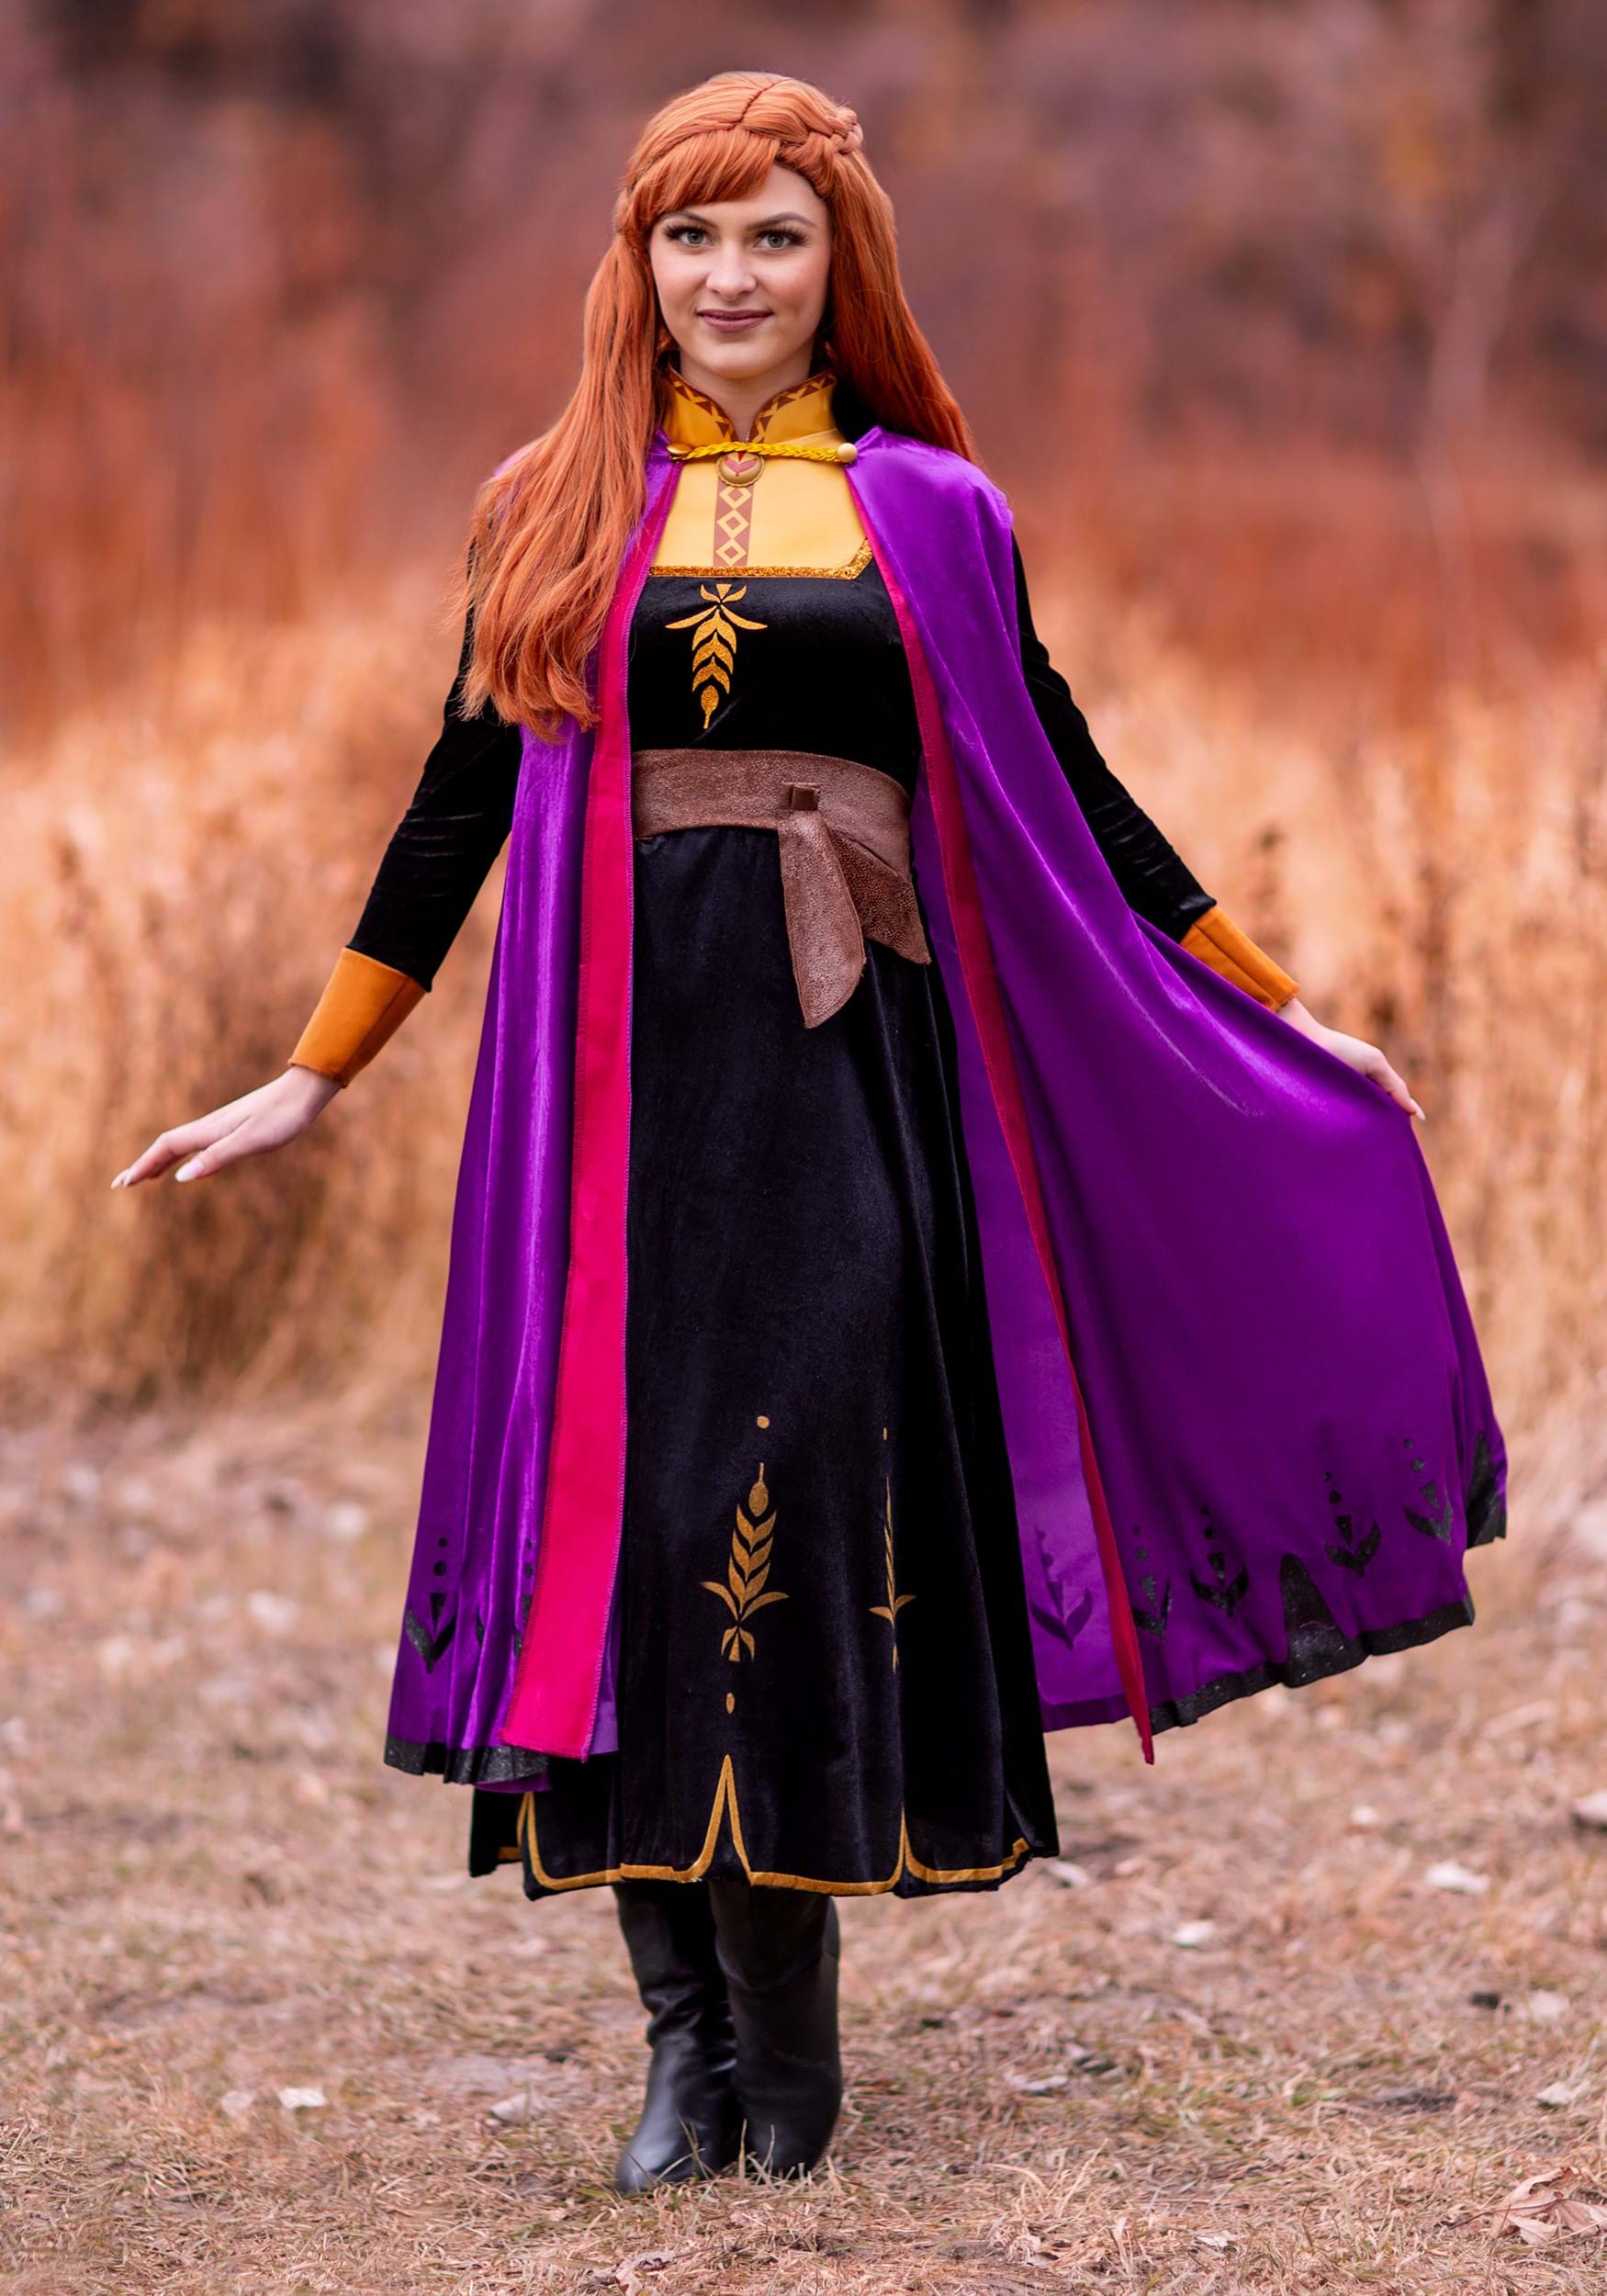 So Much To Make: DIY Adult Anna Costume